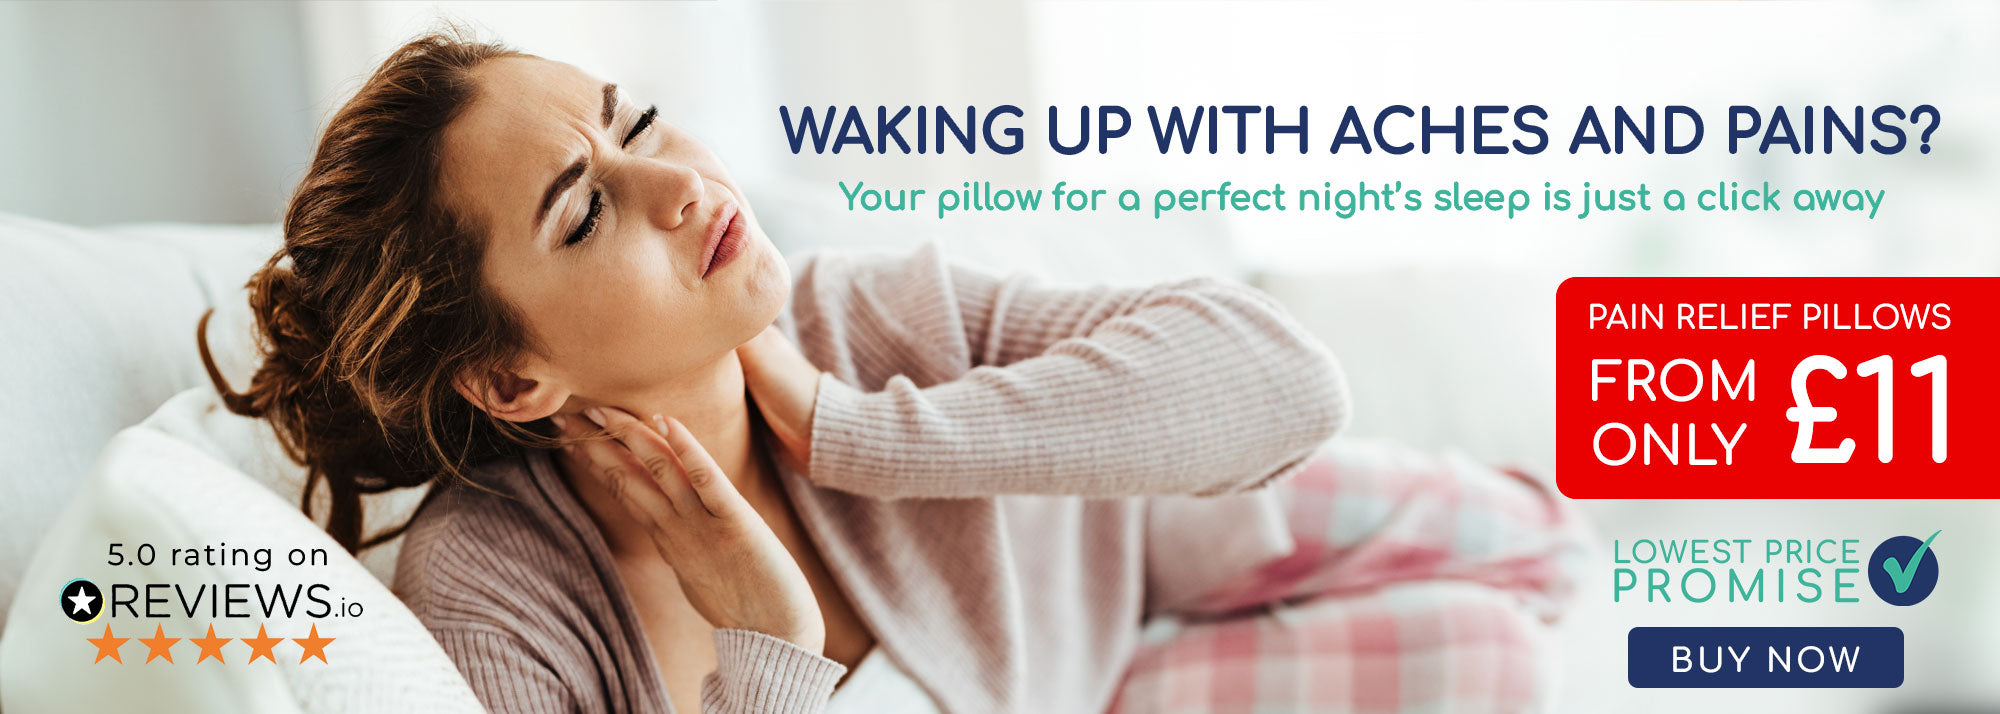 pain relief pillows to cure neck pain and get better sleep